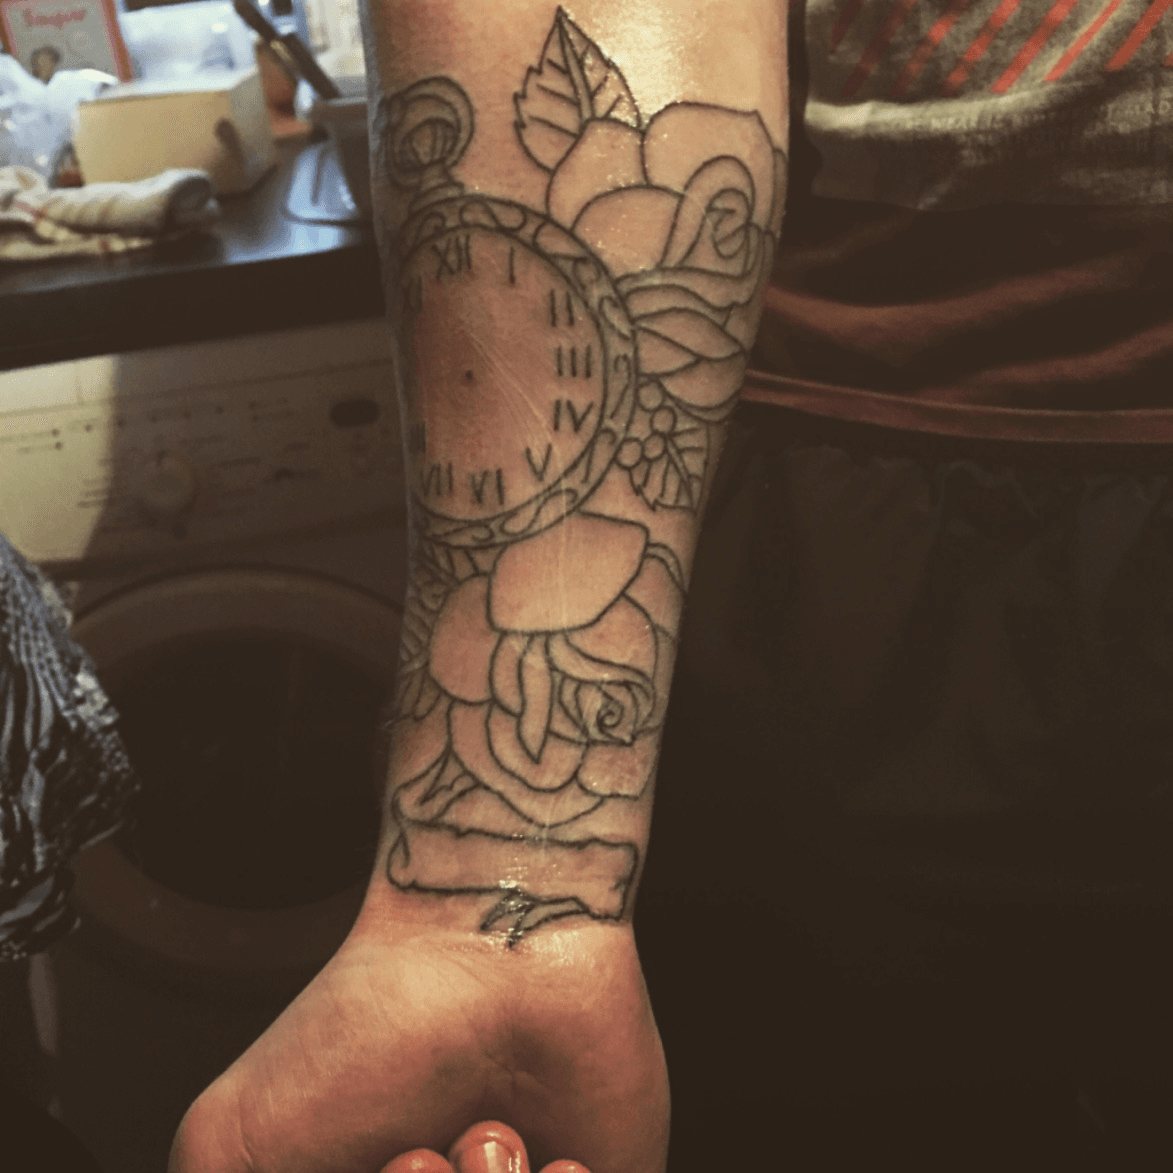 Tattoo uploaded by nay1995 • Outline to finish the sleeve #tattoo #sleeve  #linework #forearm #Memory #memorial #newink #outline #clock #roeses #rose  • Tattoodo